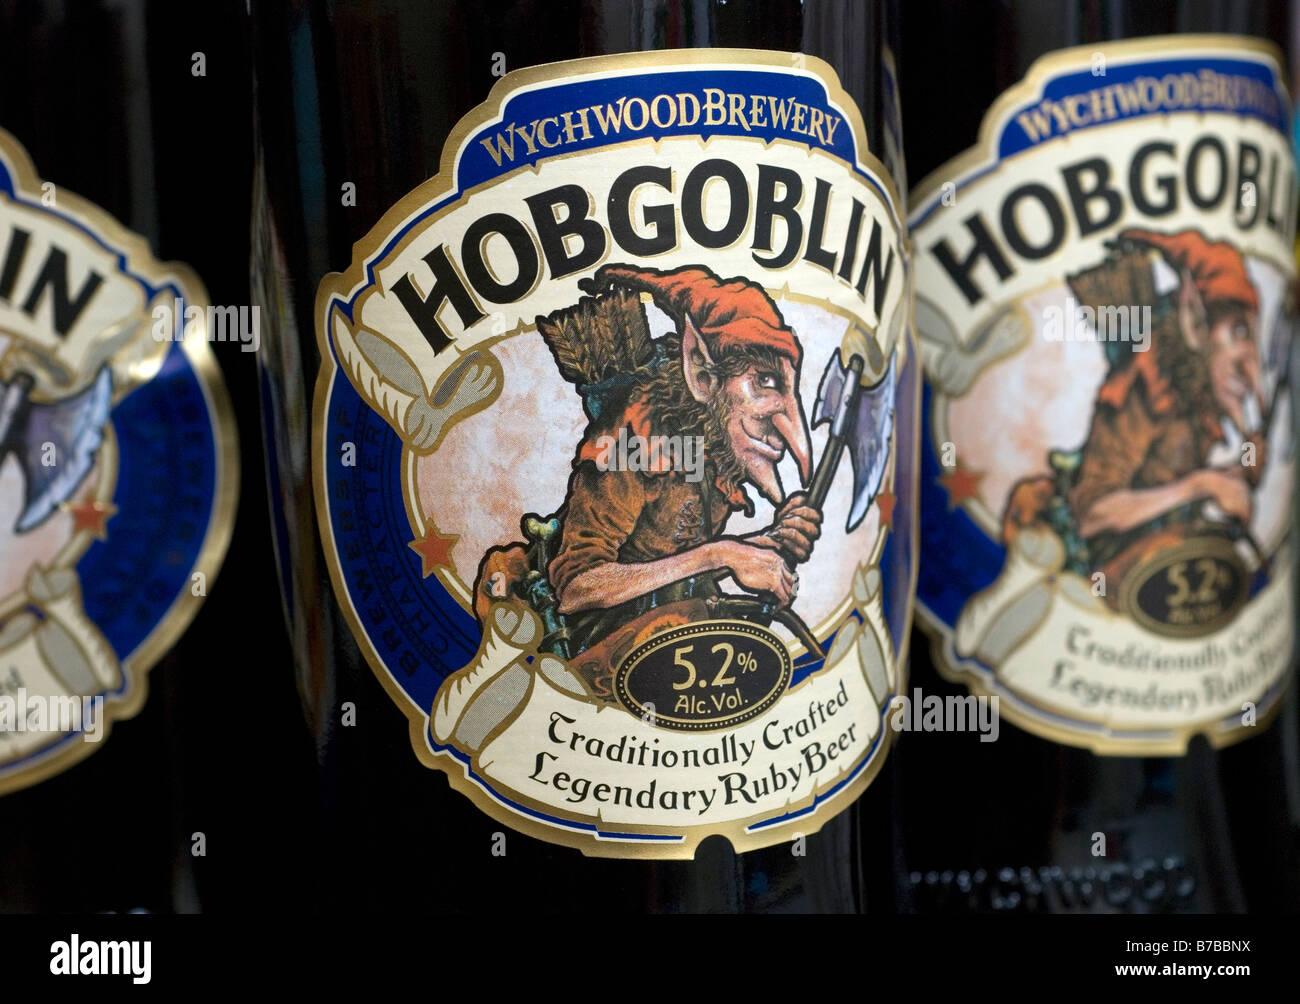 A Bottle of hobgoblin real ale from the Wychwood Brewery hand-crafted fine beers and organic ales Stock Photo